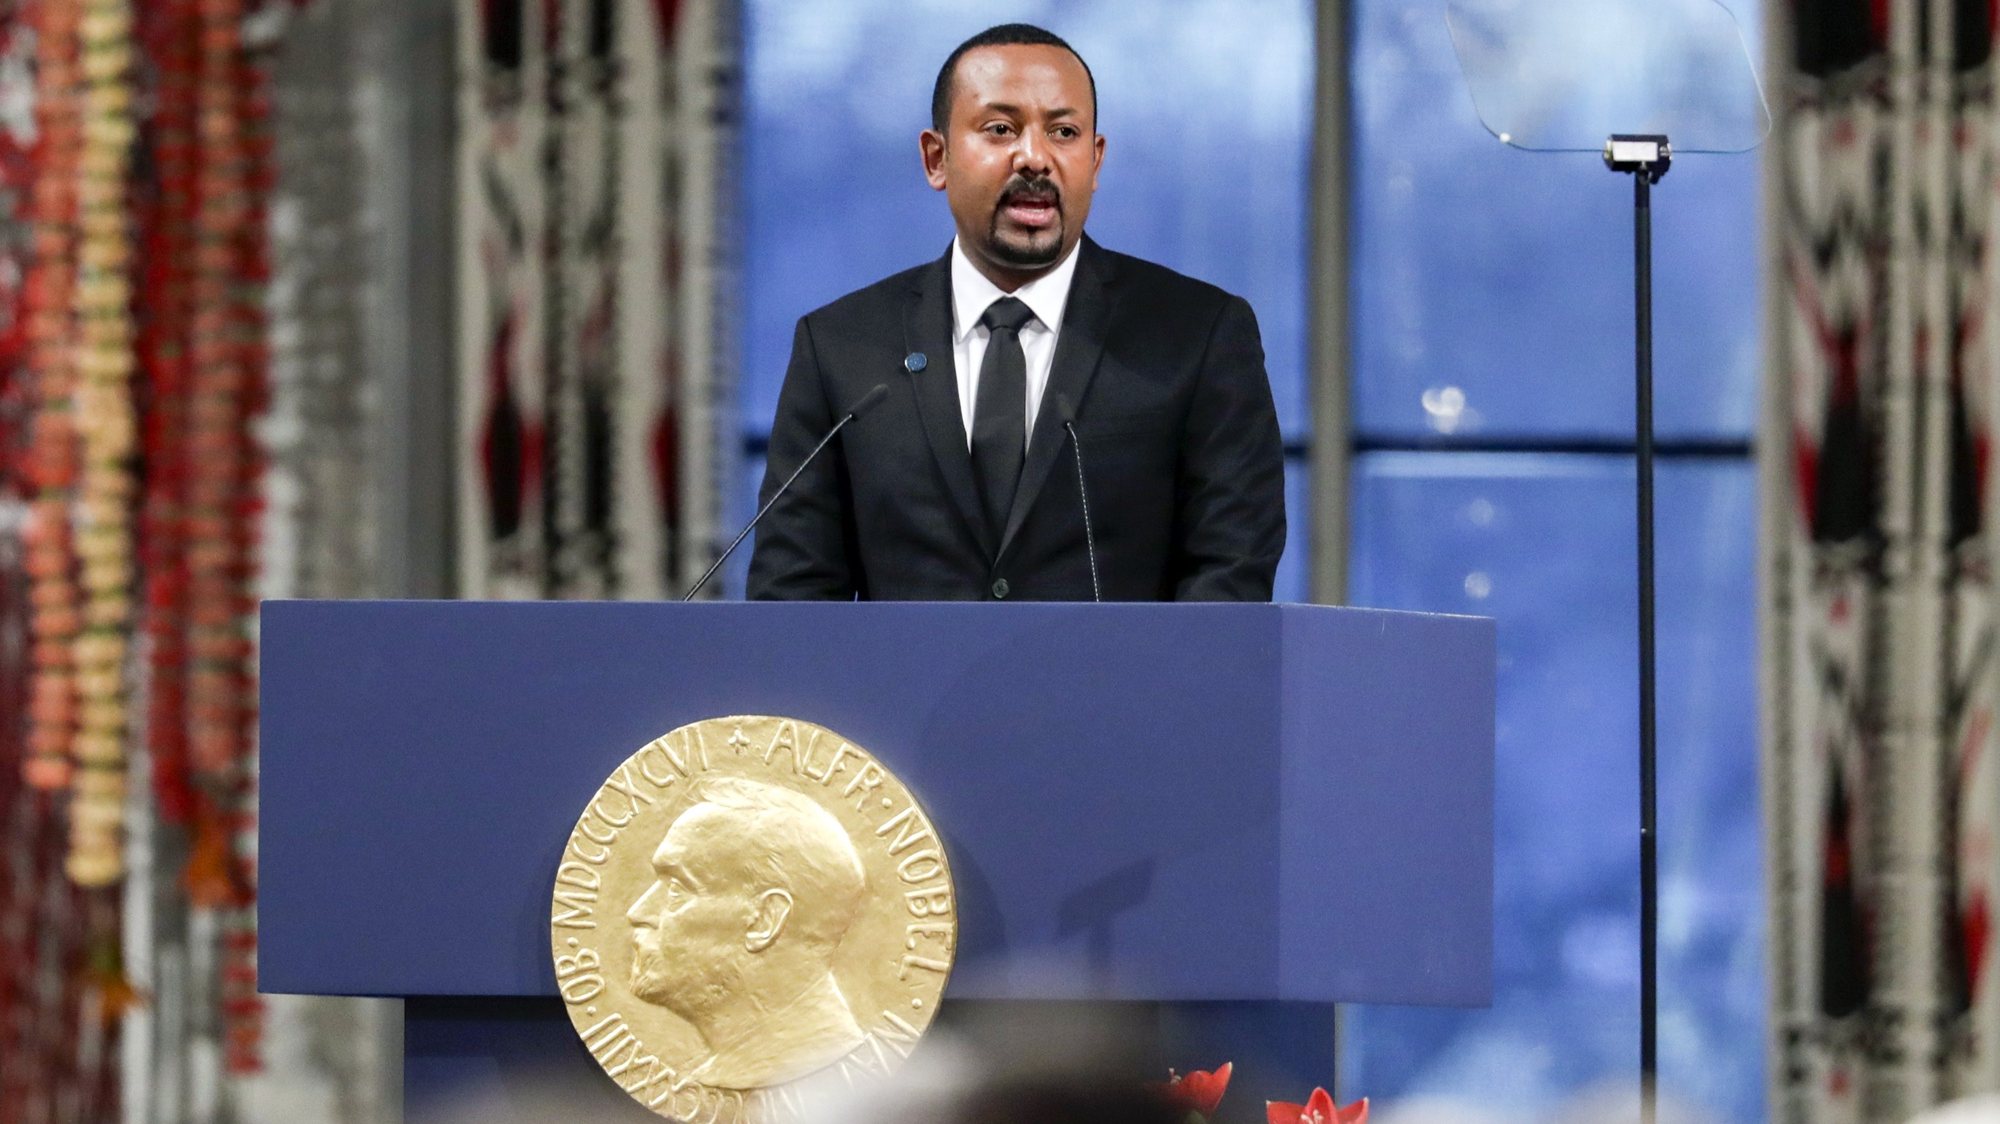 epa08059602 Ethiopian Prime Minister Abiy Ahmed Ali, the 2019 Nobel Peace Prize laureate, gives his acceptance speech during the awarding ceremony in Oslo, Norway, 10 December 2019.  EPA/Stian Lysberg Solum  NORWAY OUT